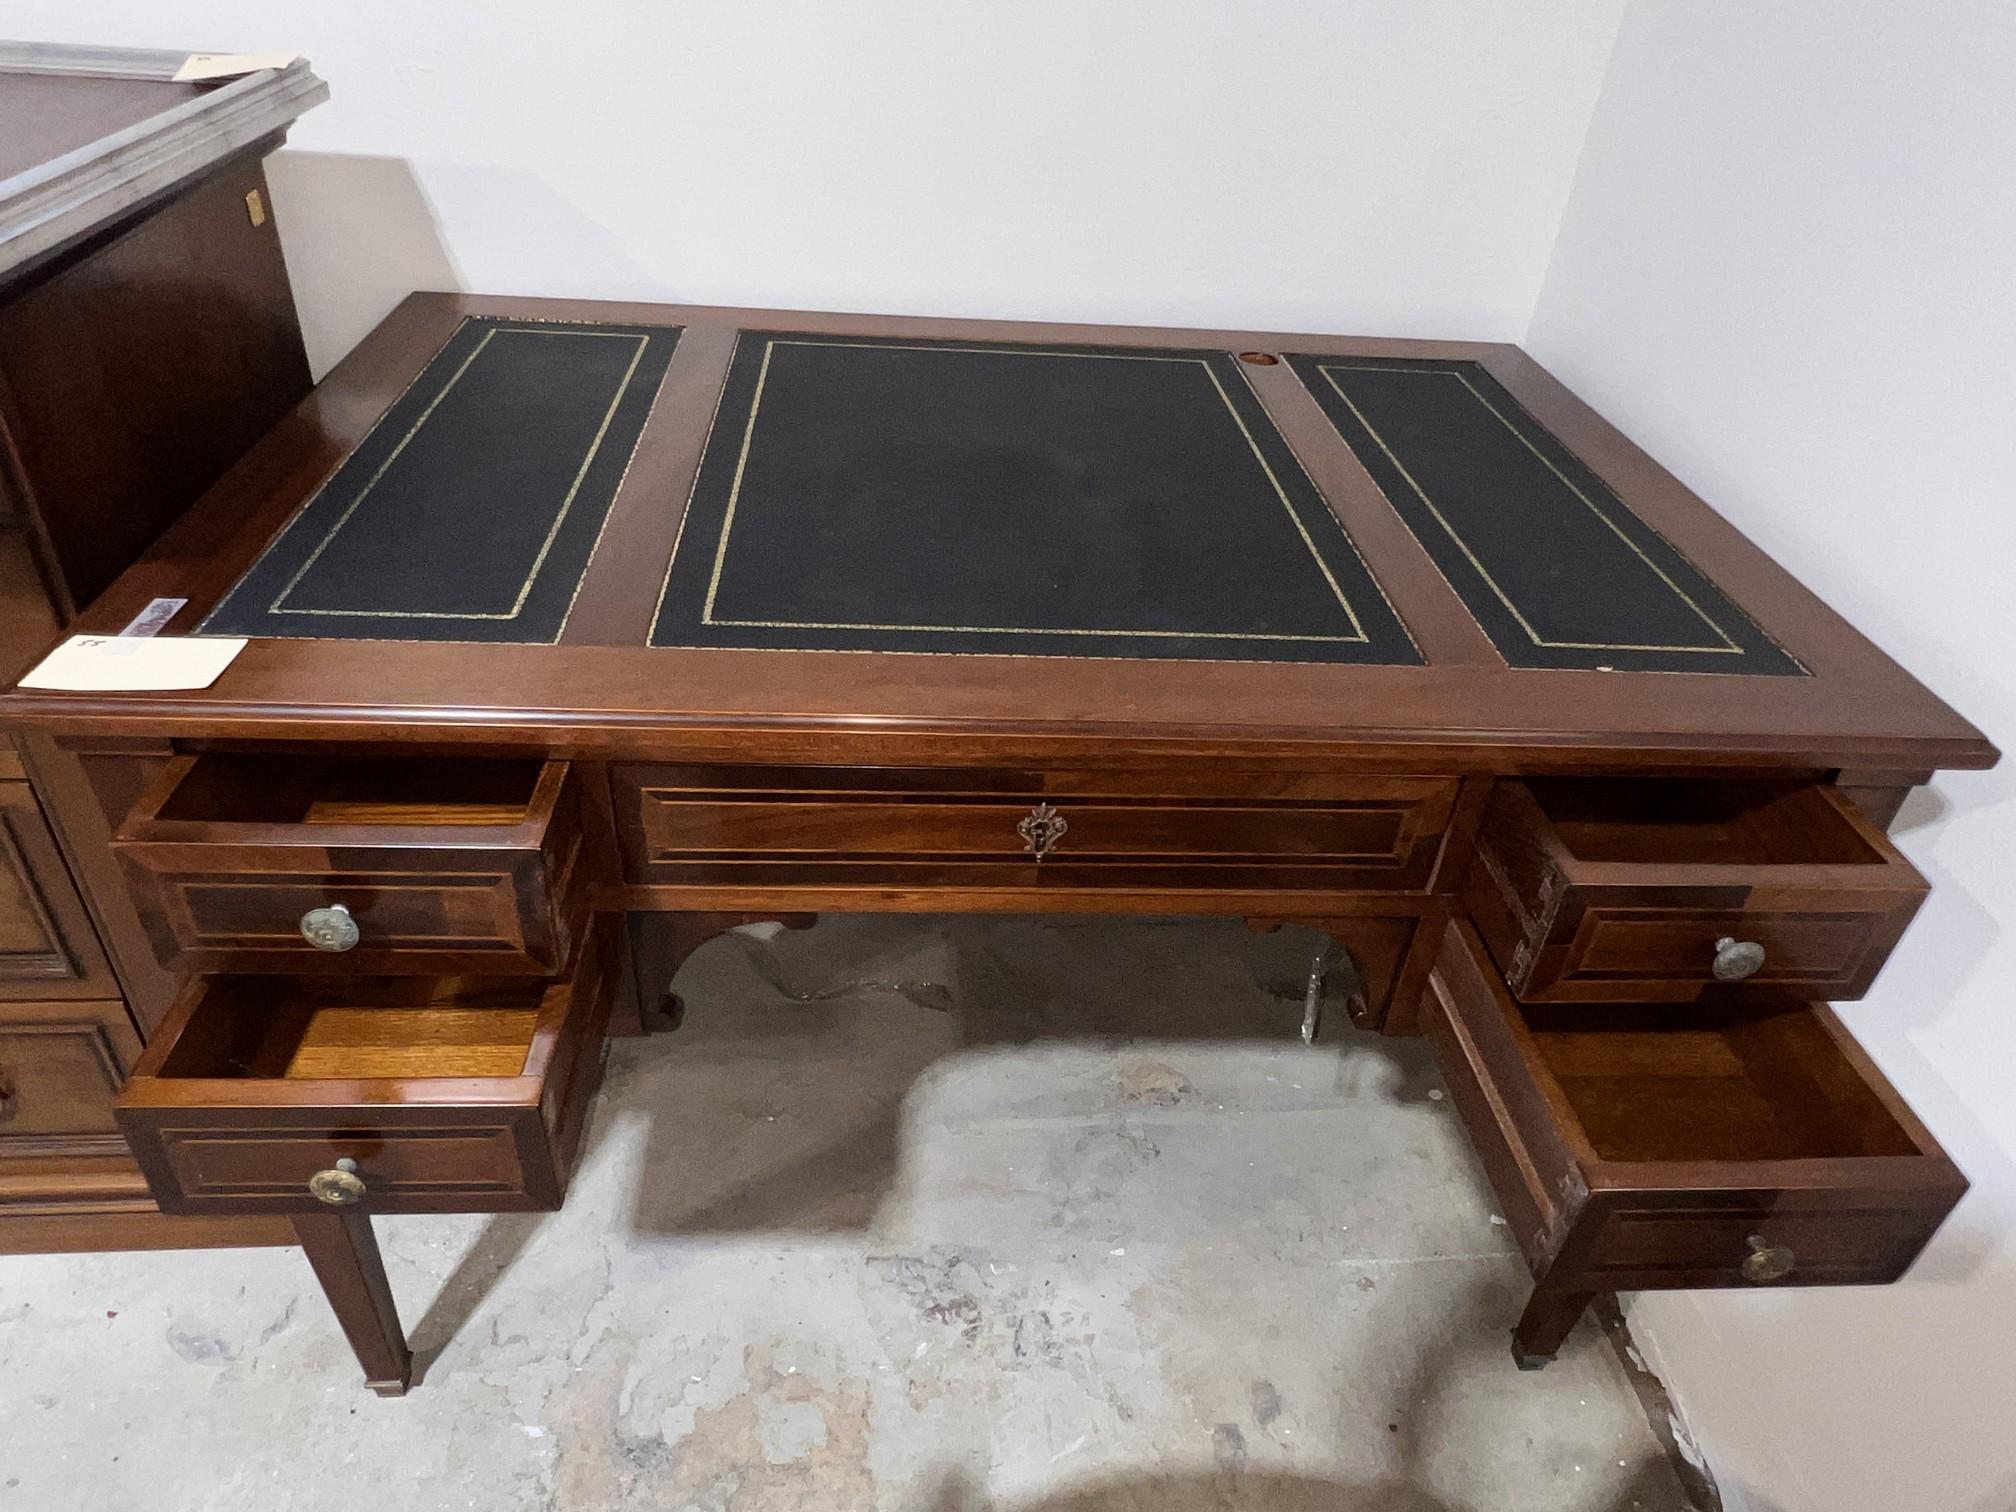 Cherry Wood Black leather Top Desk with Gold Trimmed and 2 Extentions - Made in Italy